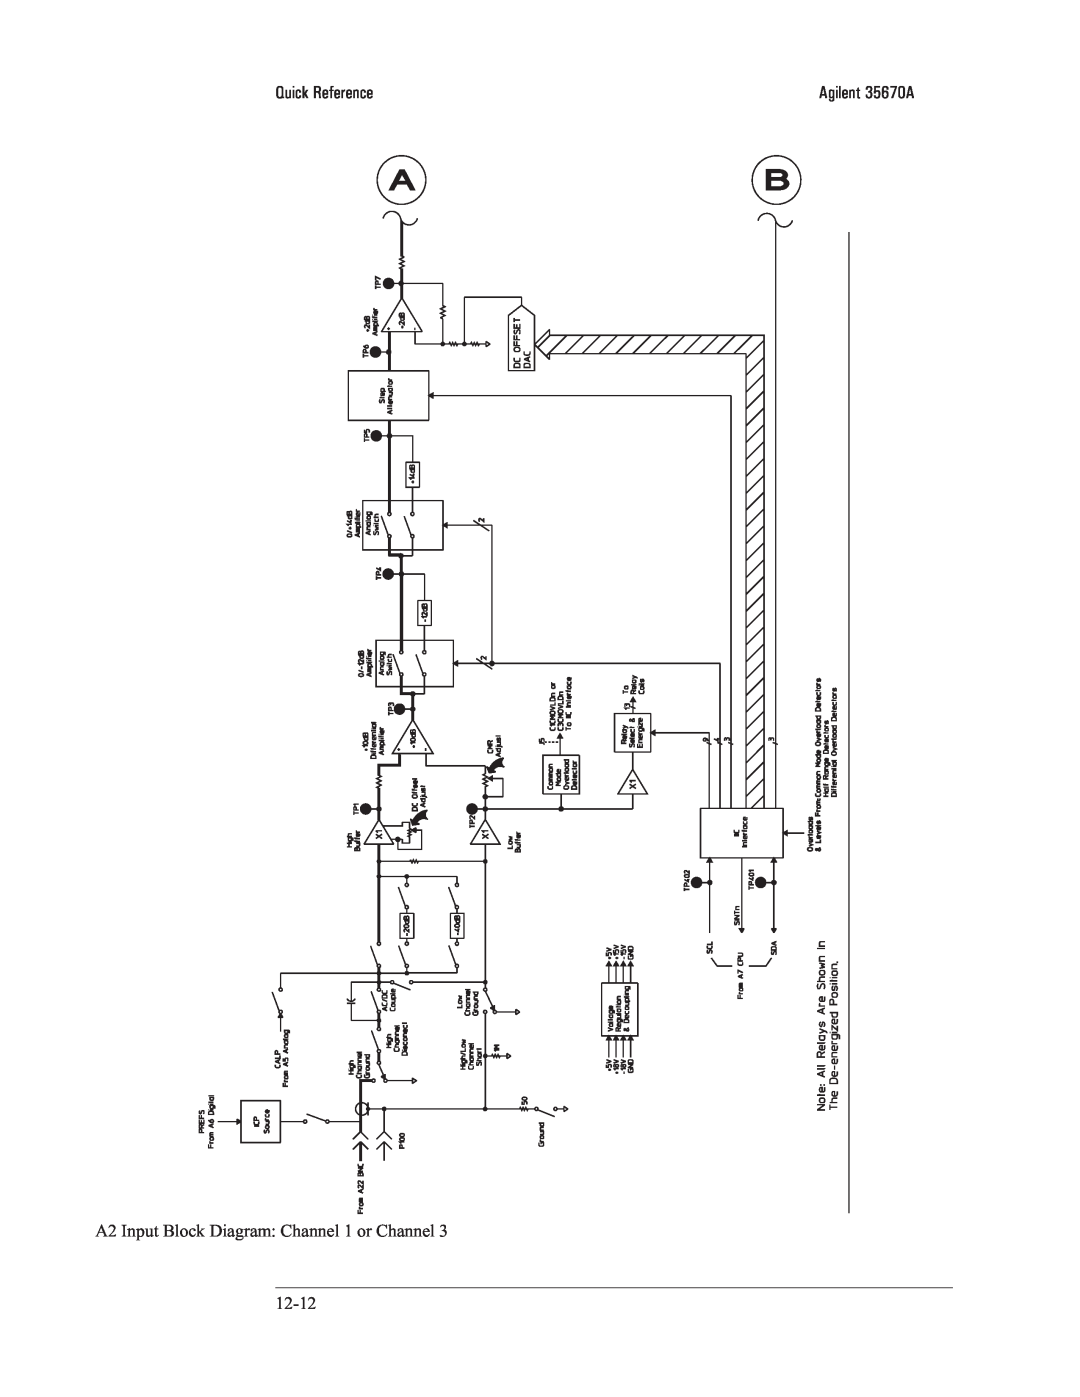 Agilent Technologies 35670-90066 manual Quick Reference, A2 Input Block Diagram: Channel 1 or Channel, Agilent 35670A 